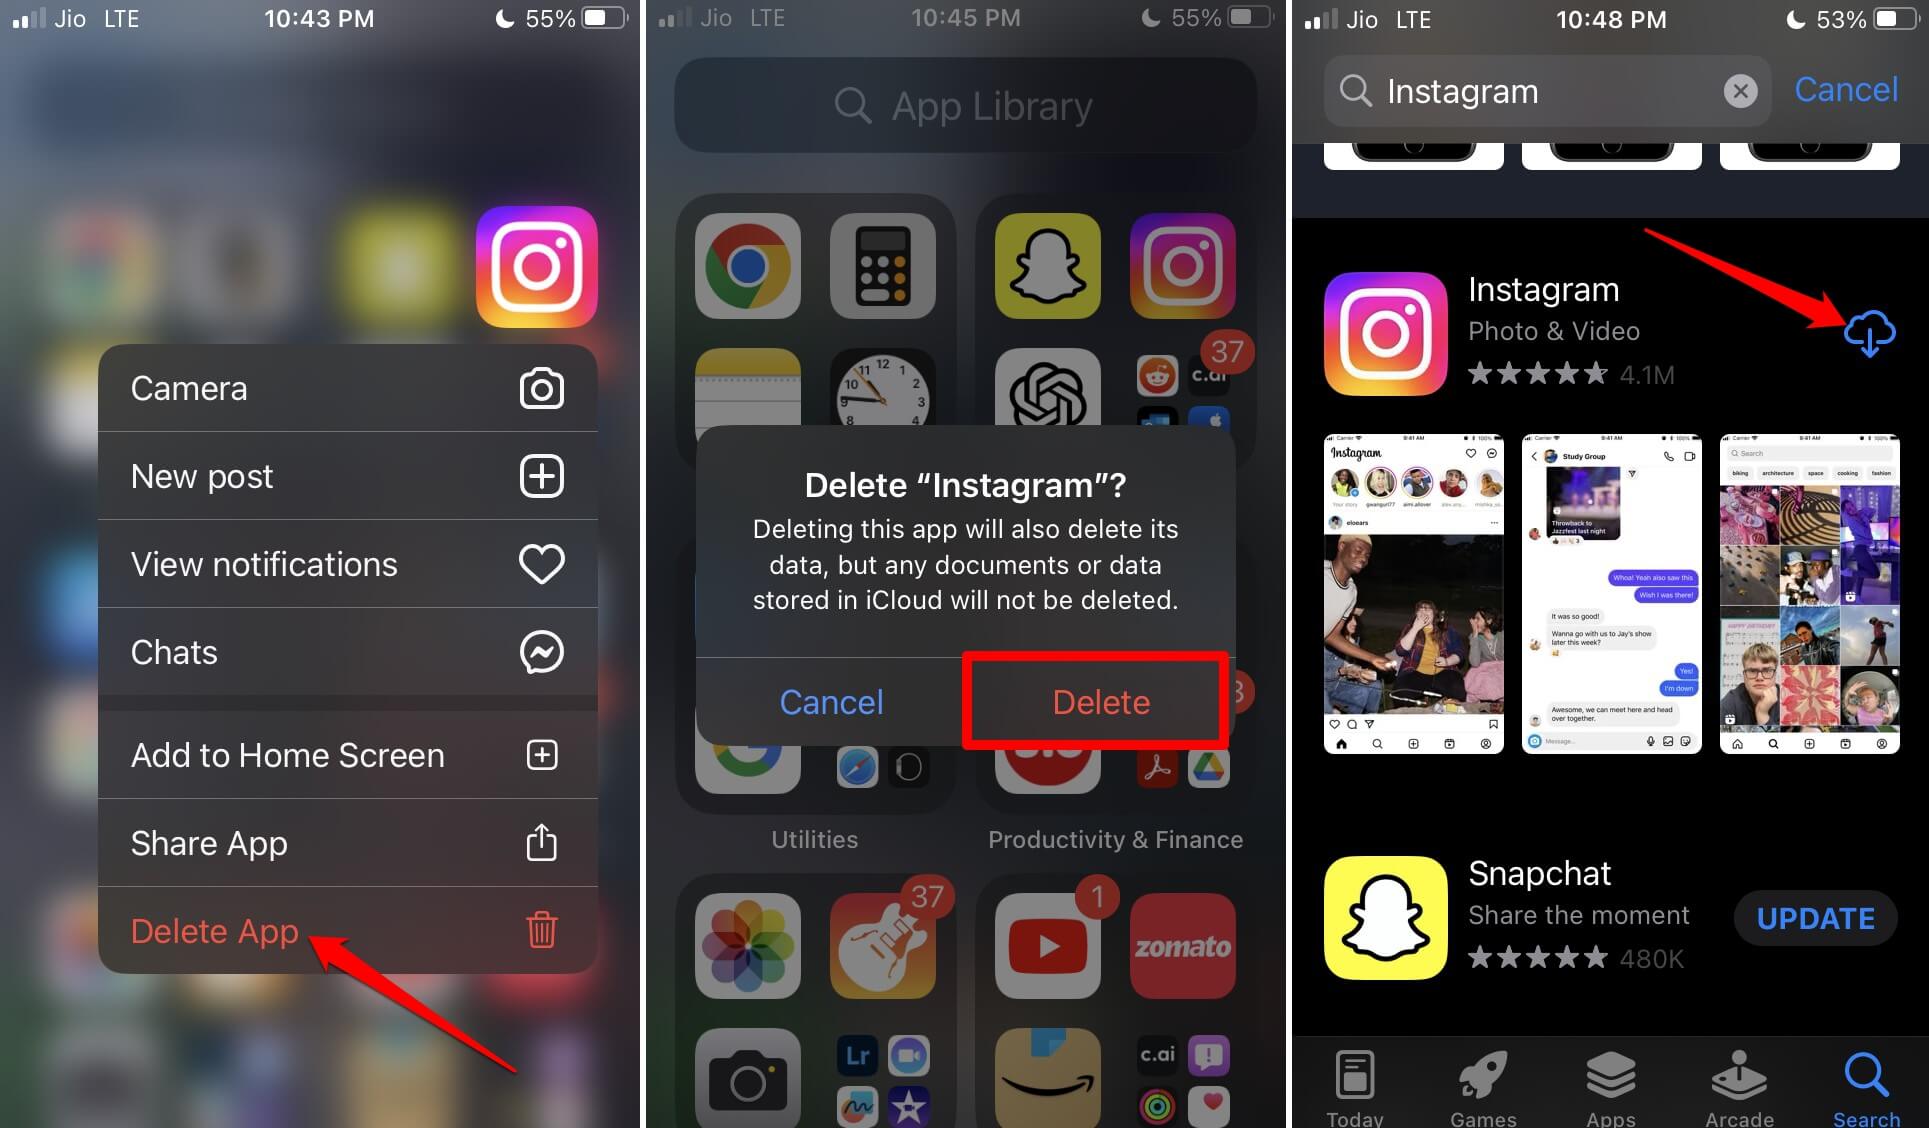 delete-Instagram-from-iPhone-and-reinstall-the-app-